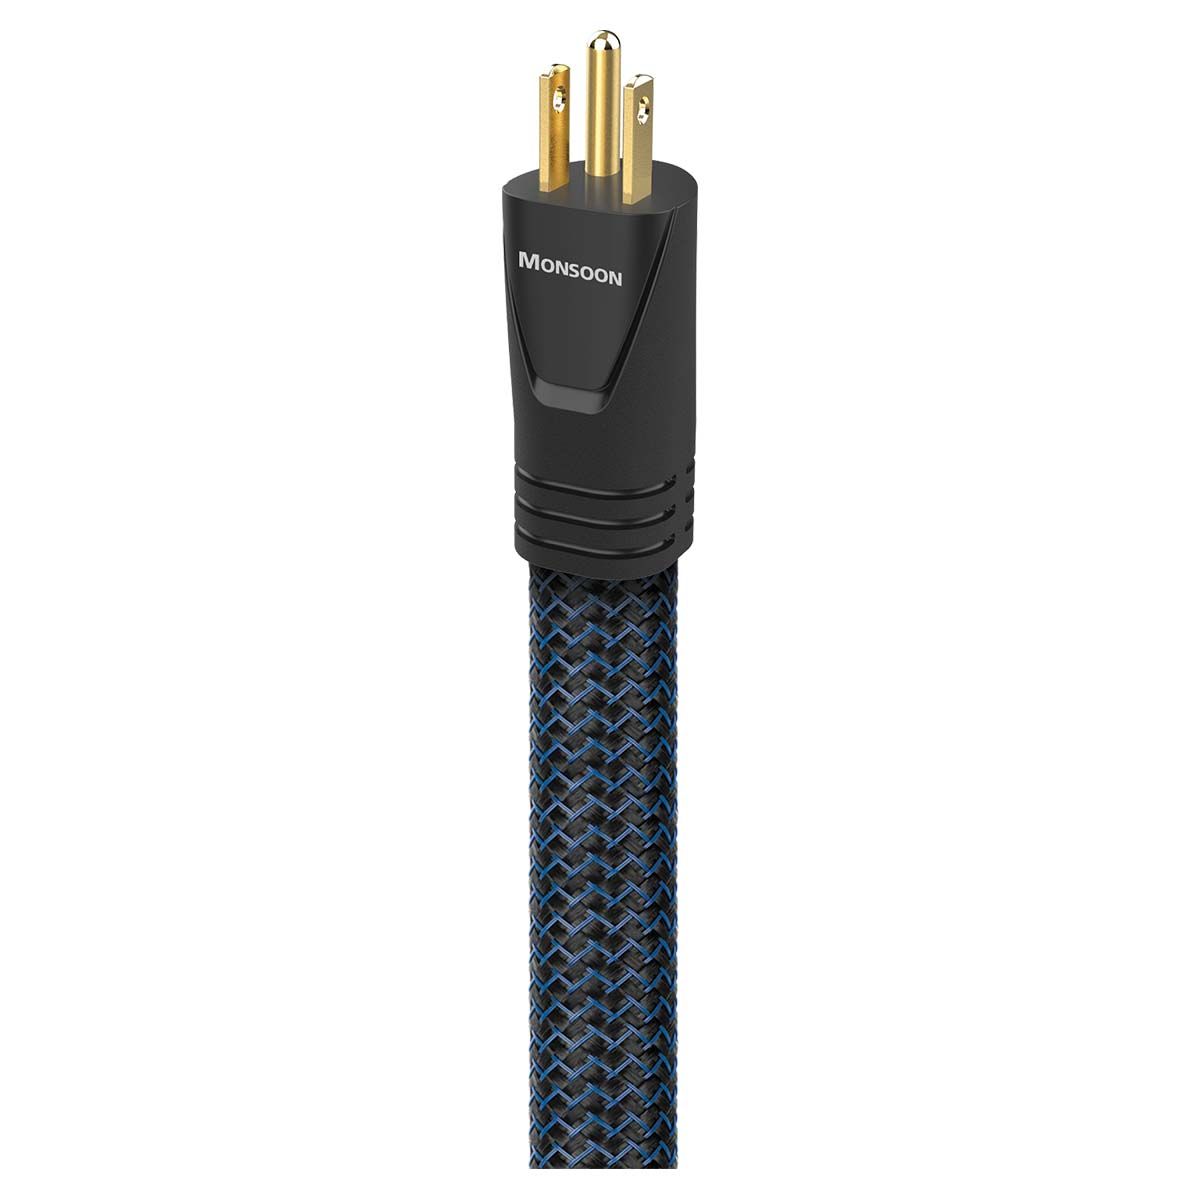 AudioQuest Monsoon AC Power Cable, outlet end